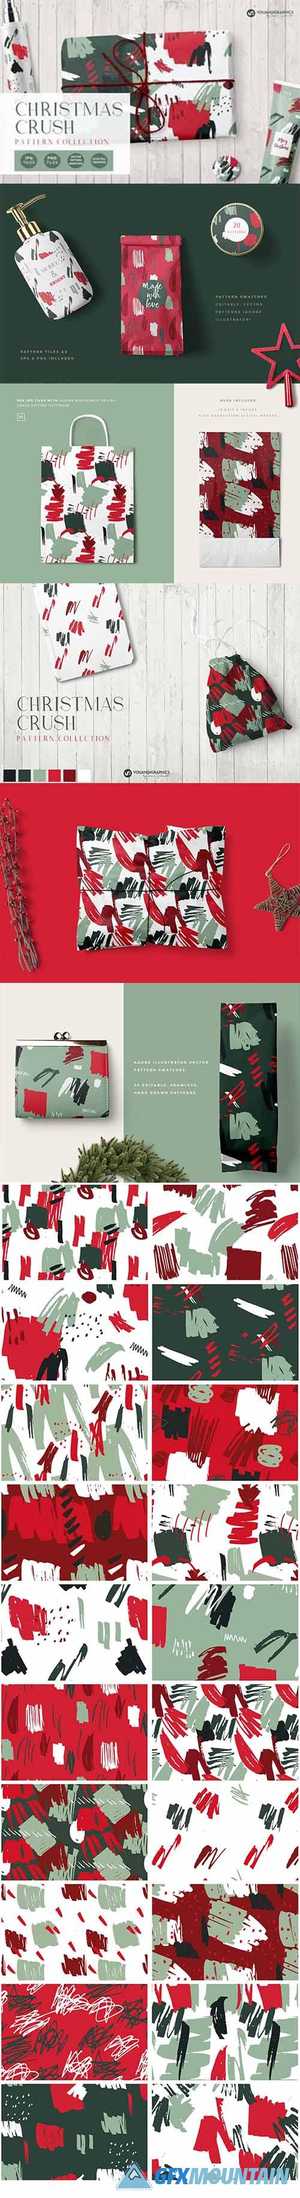 Christmas Crush Abstract Patterns 5613076